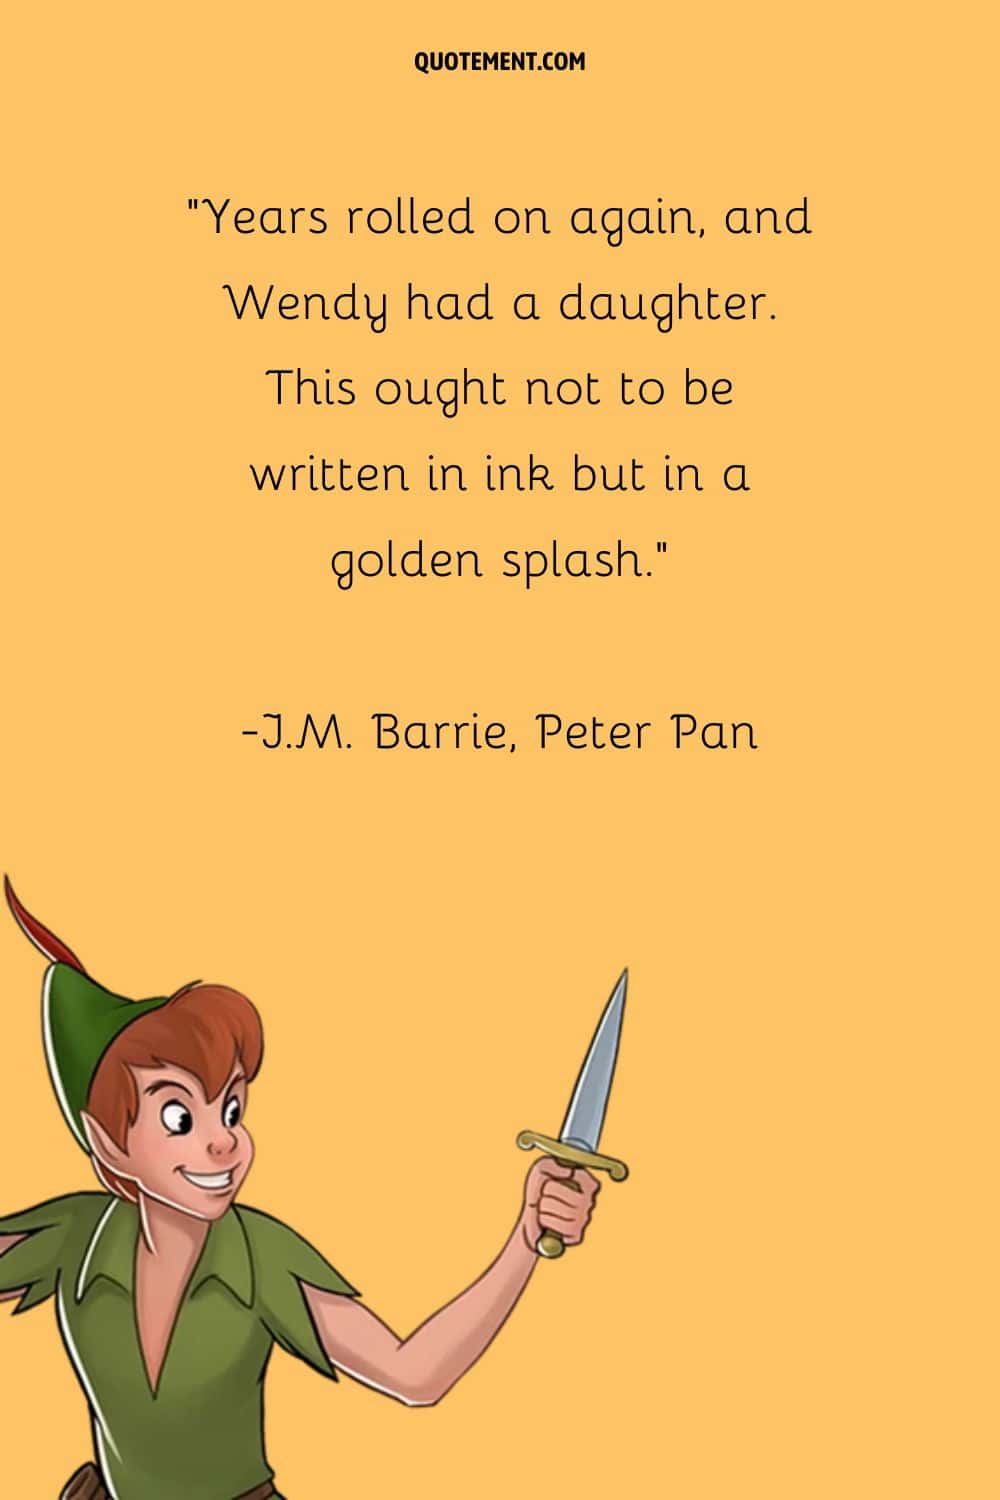 “Years rolled on again, and Wendy had a daughter. This ought not to be written in ink but in a golden splash.” ― J.M. Barrie, Peter Pan